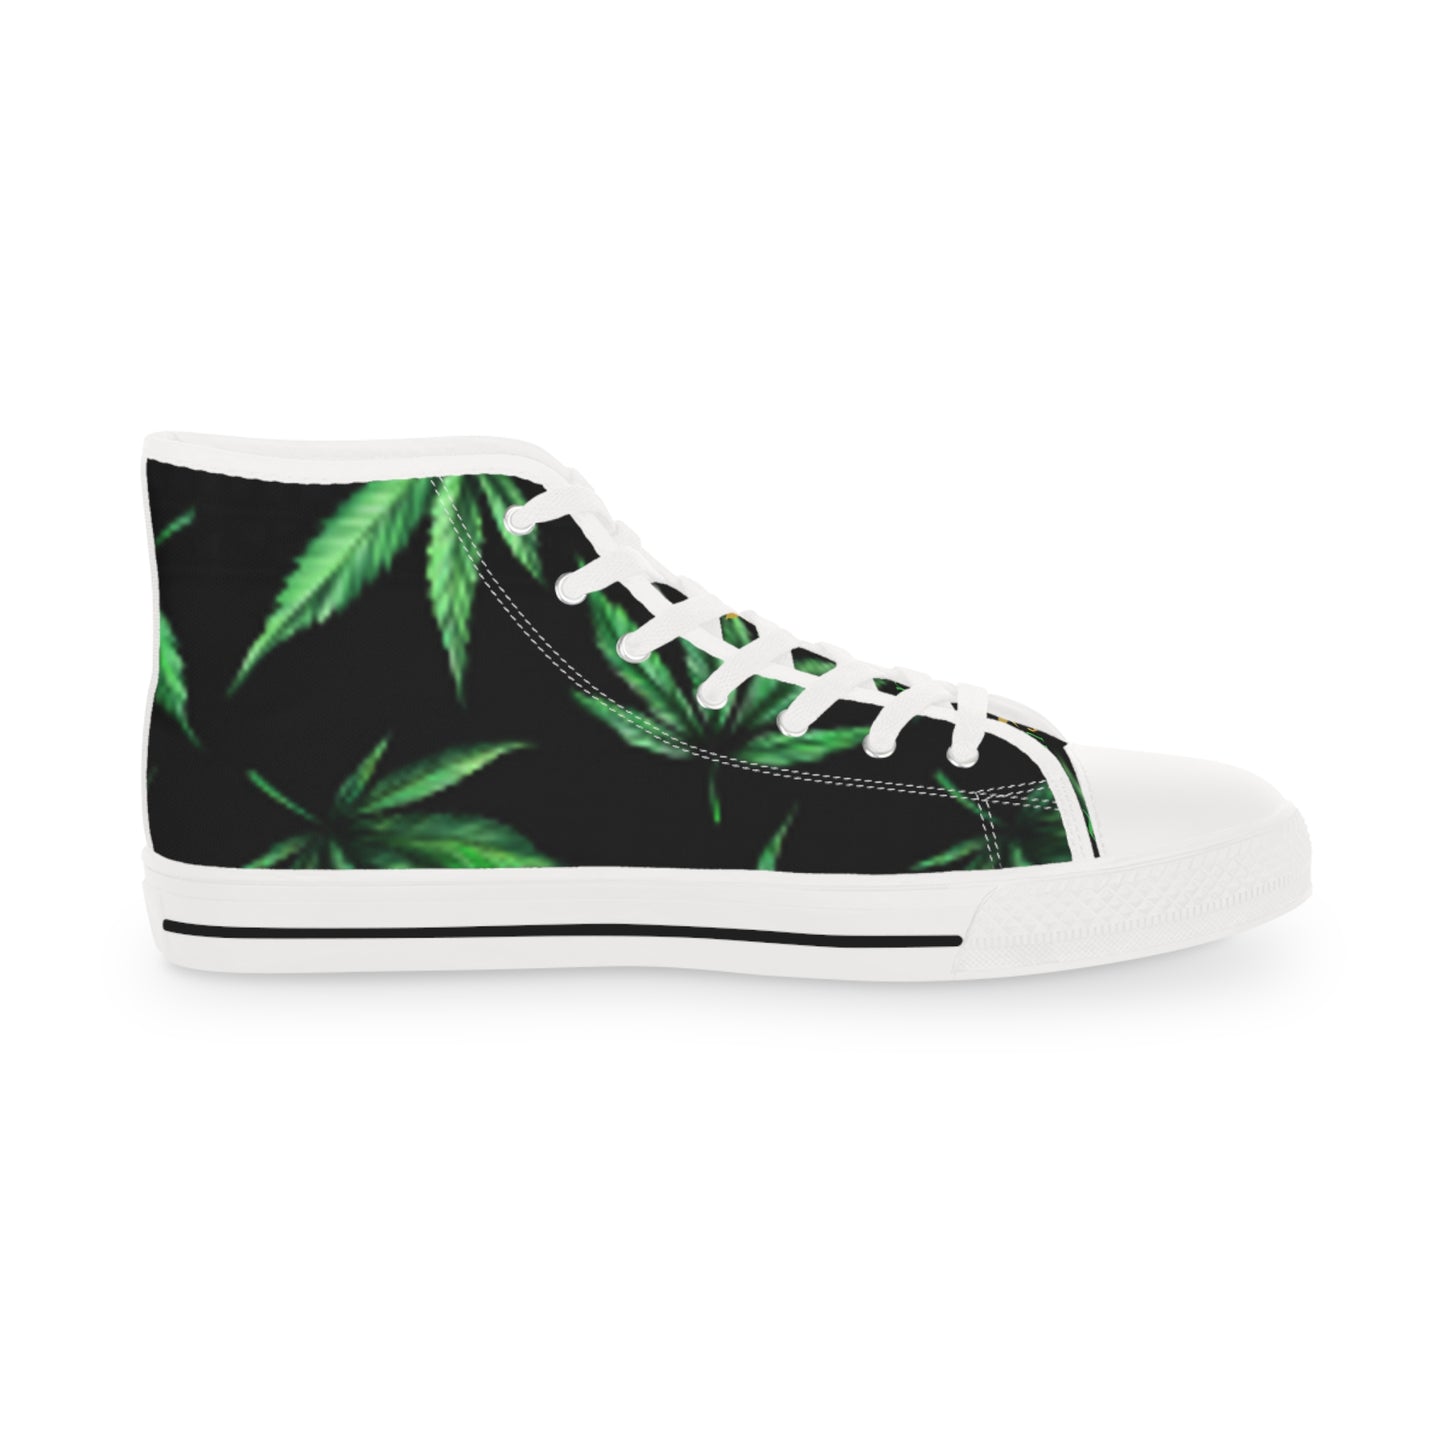 Unisex High Top Fashion Sneakers by Queen Mary